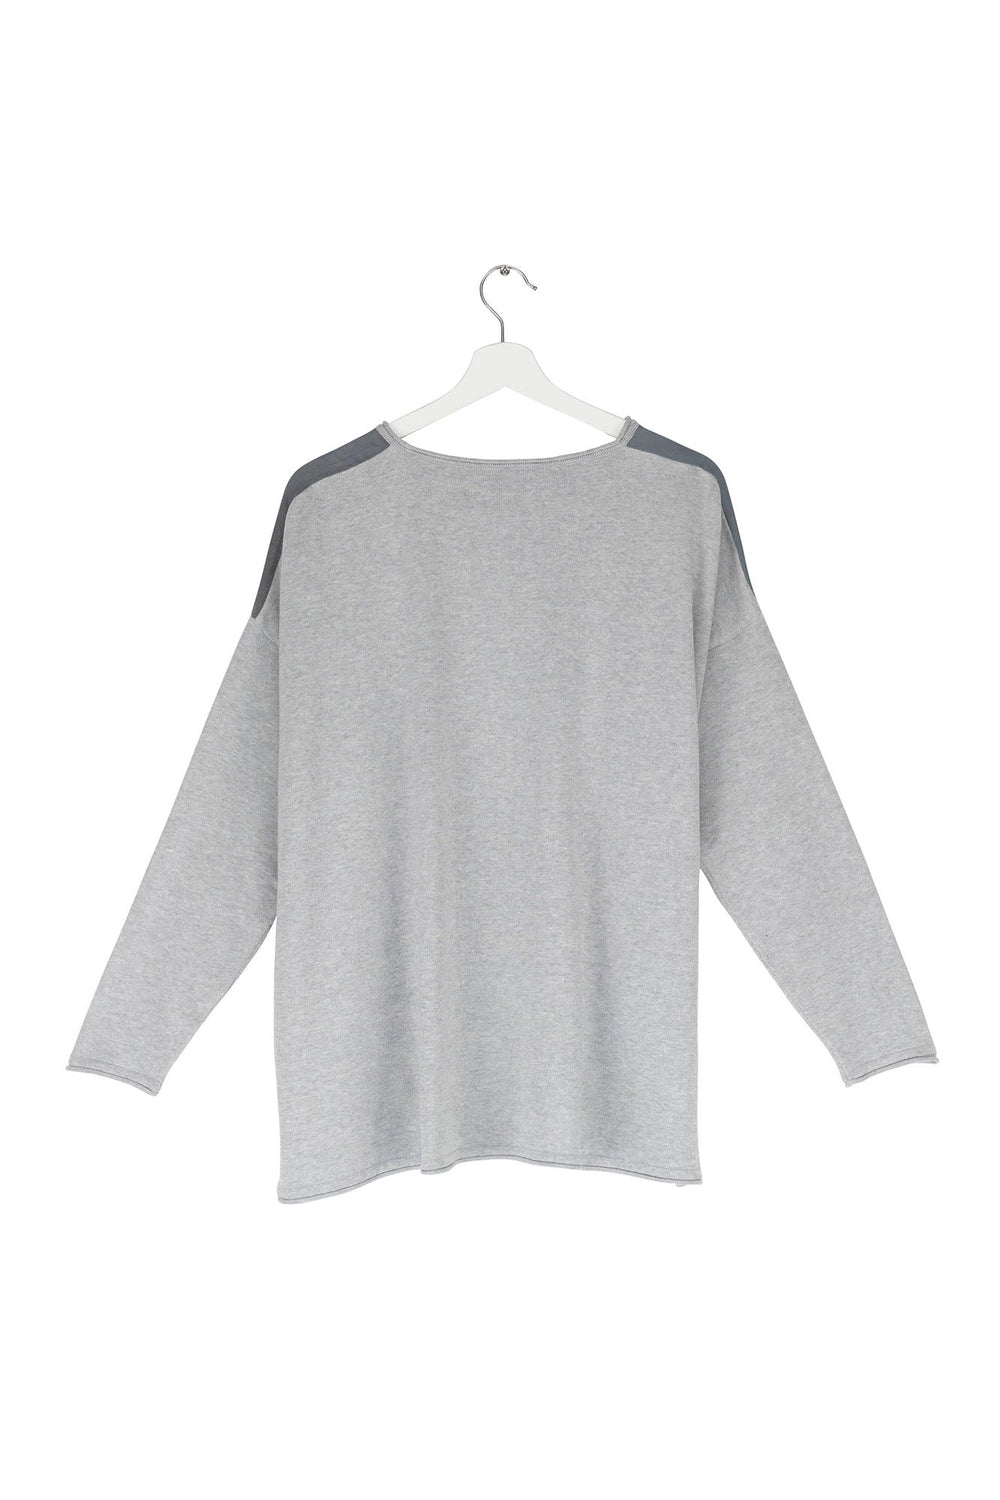 One Hundred Stars Stork Crane Grey Cotton Jumper - Here is our best selling Stork grey print on the front of this cool boxy grey jumper. 